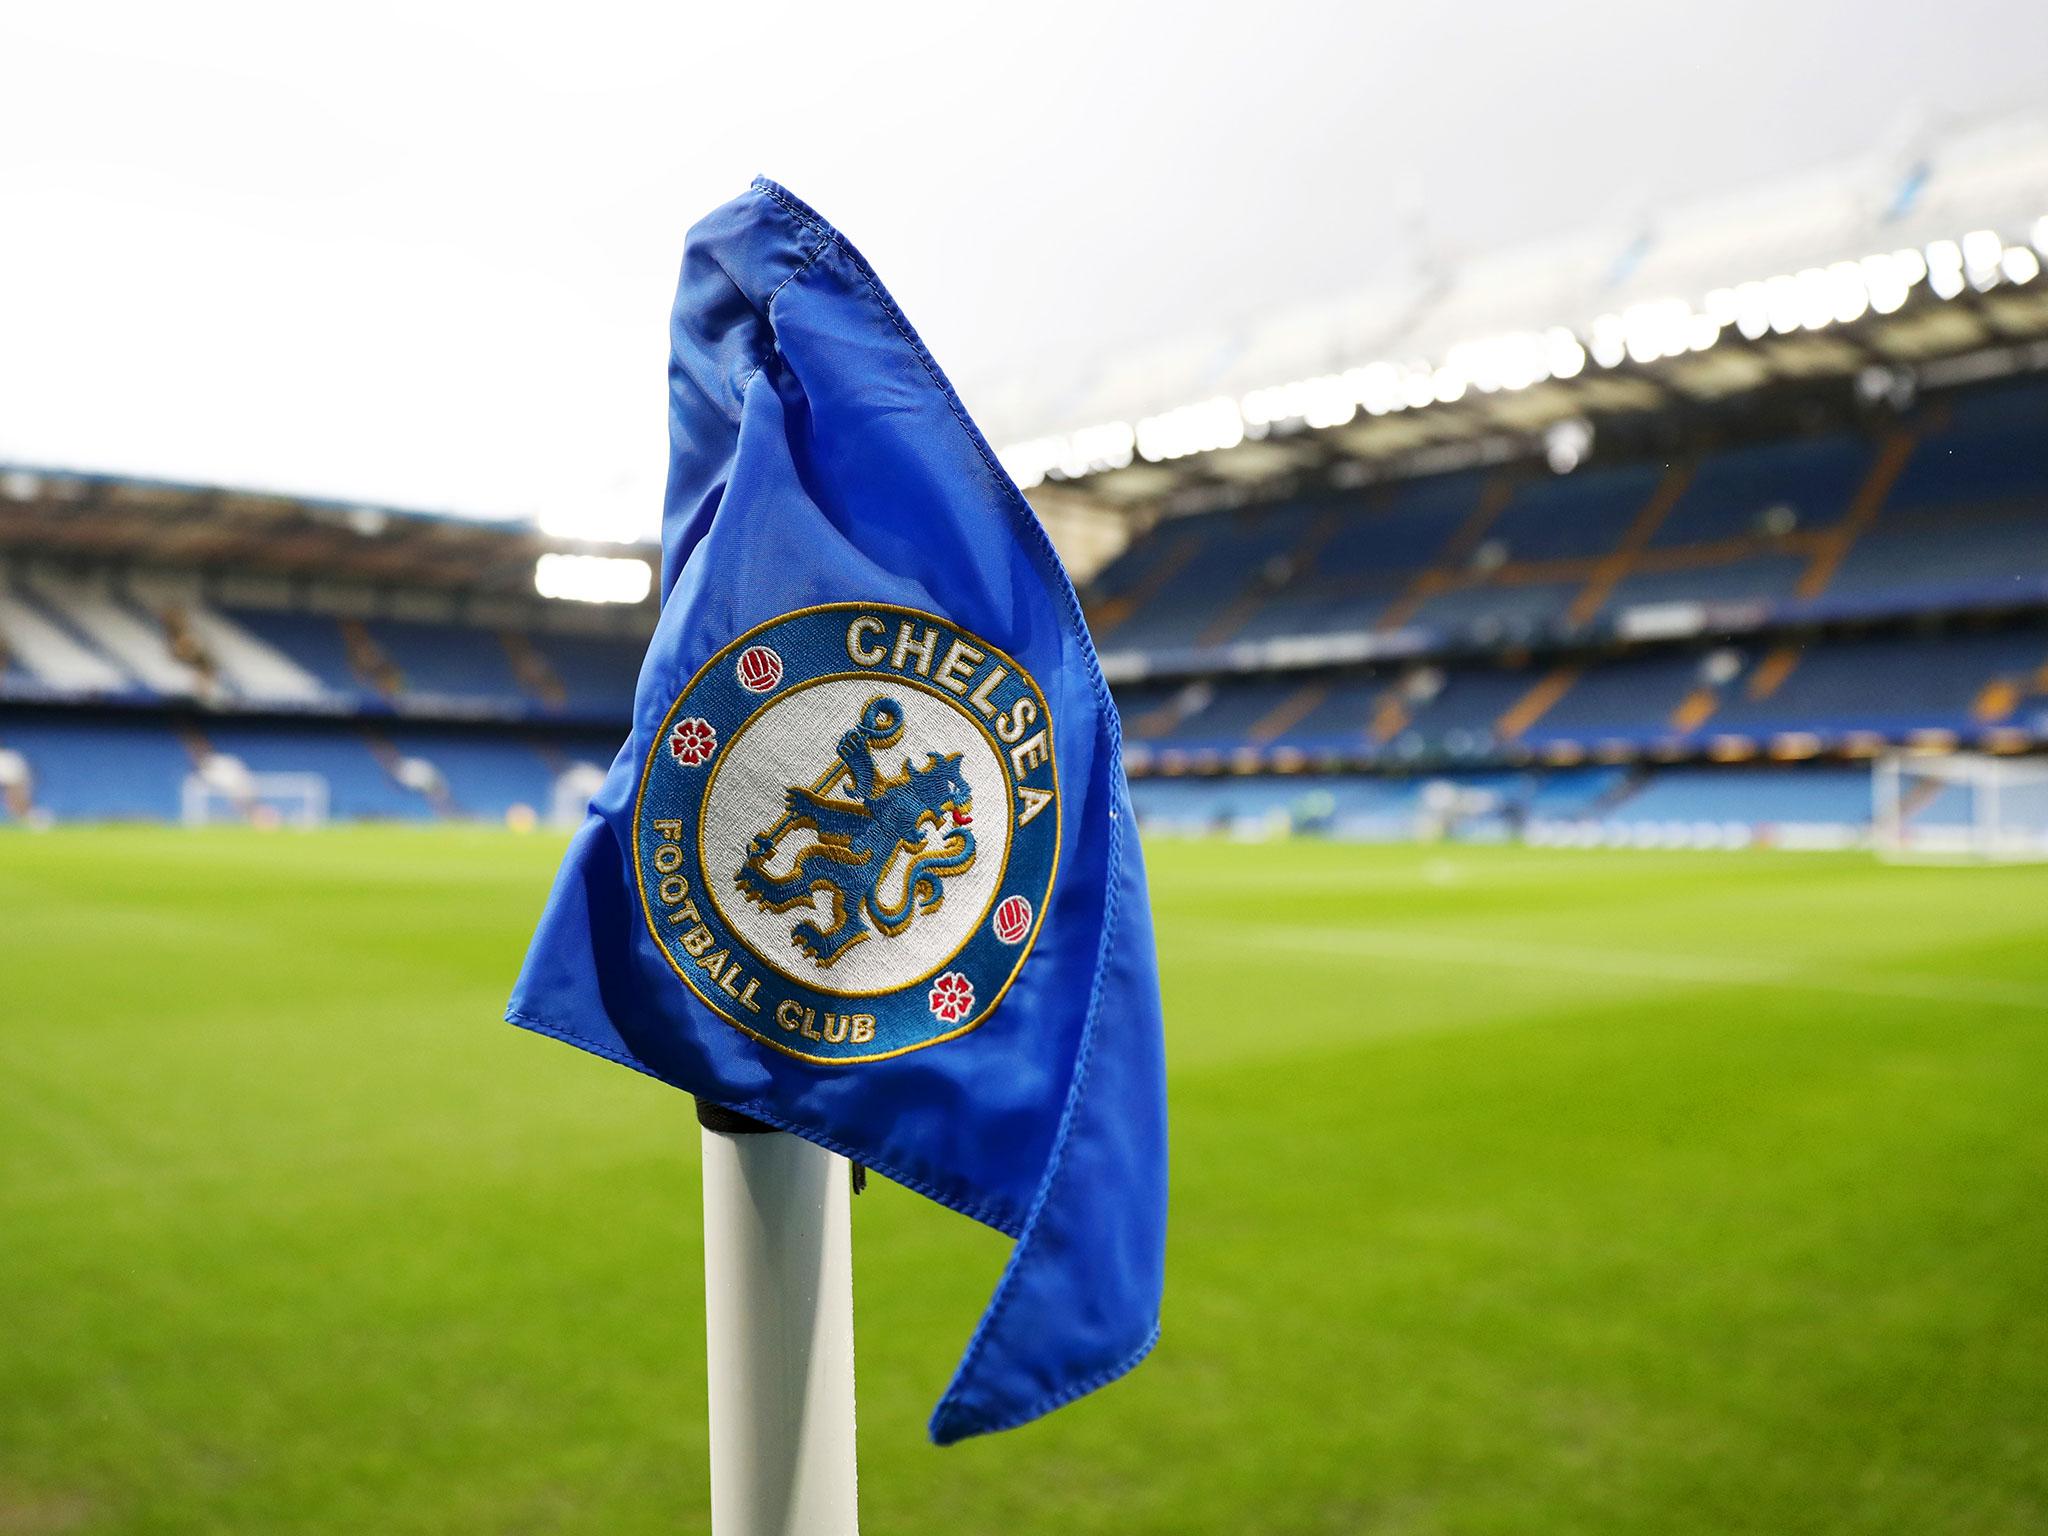 Chelsea are edging closer to a new stadium